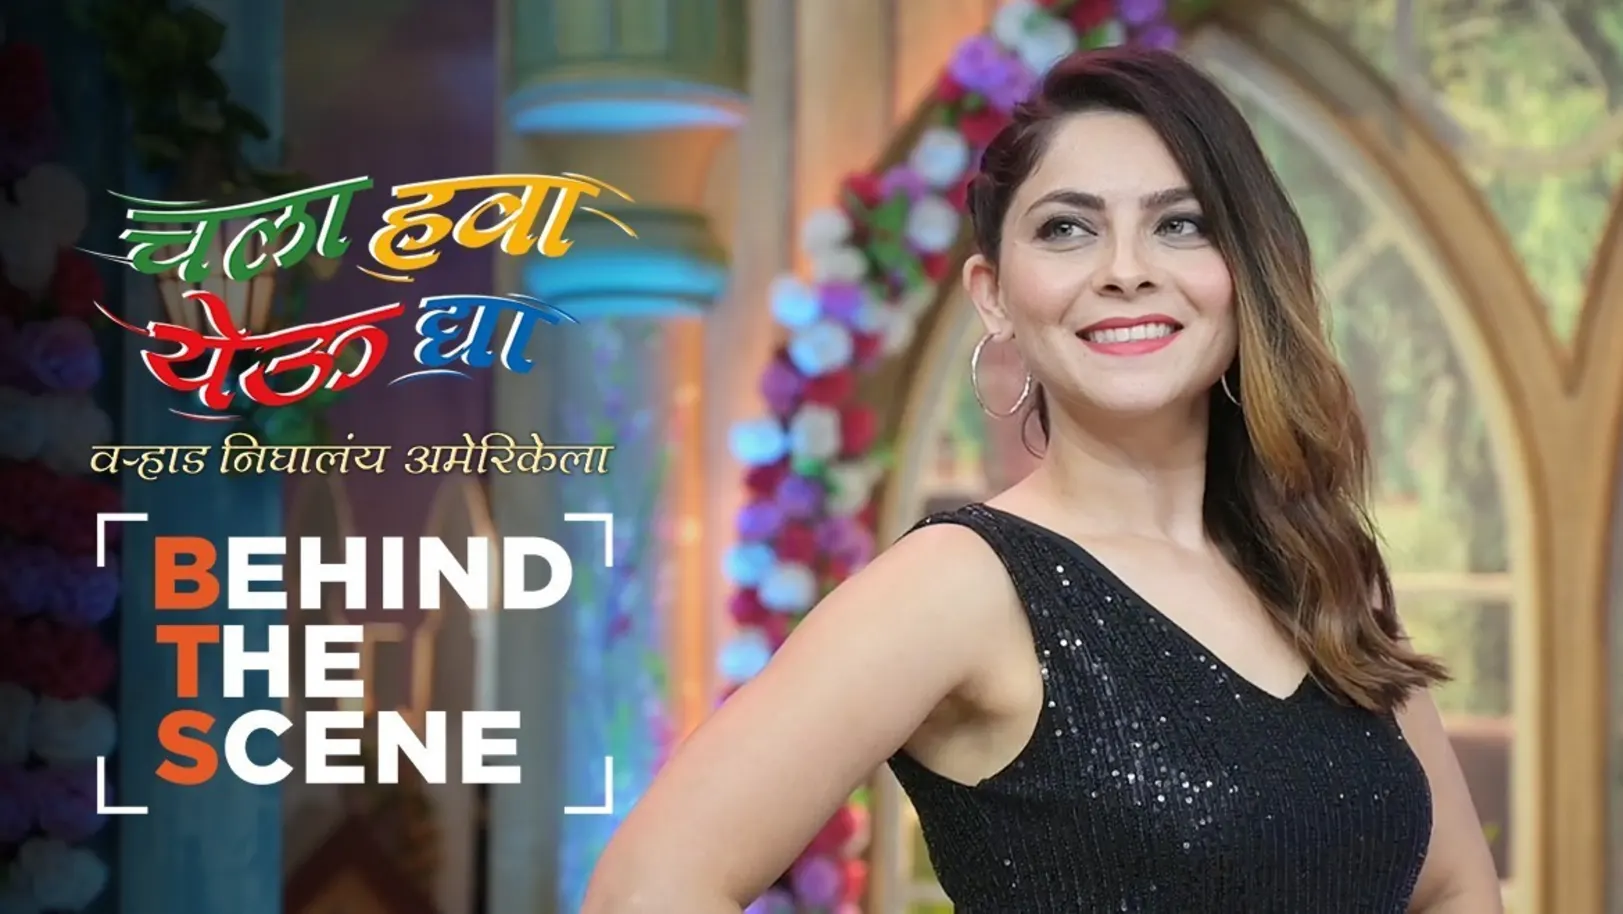 Sonalee Talks about Her New Show | Behind the Scenes | Chala Hawa Yeu Dya 